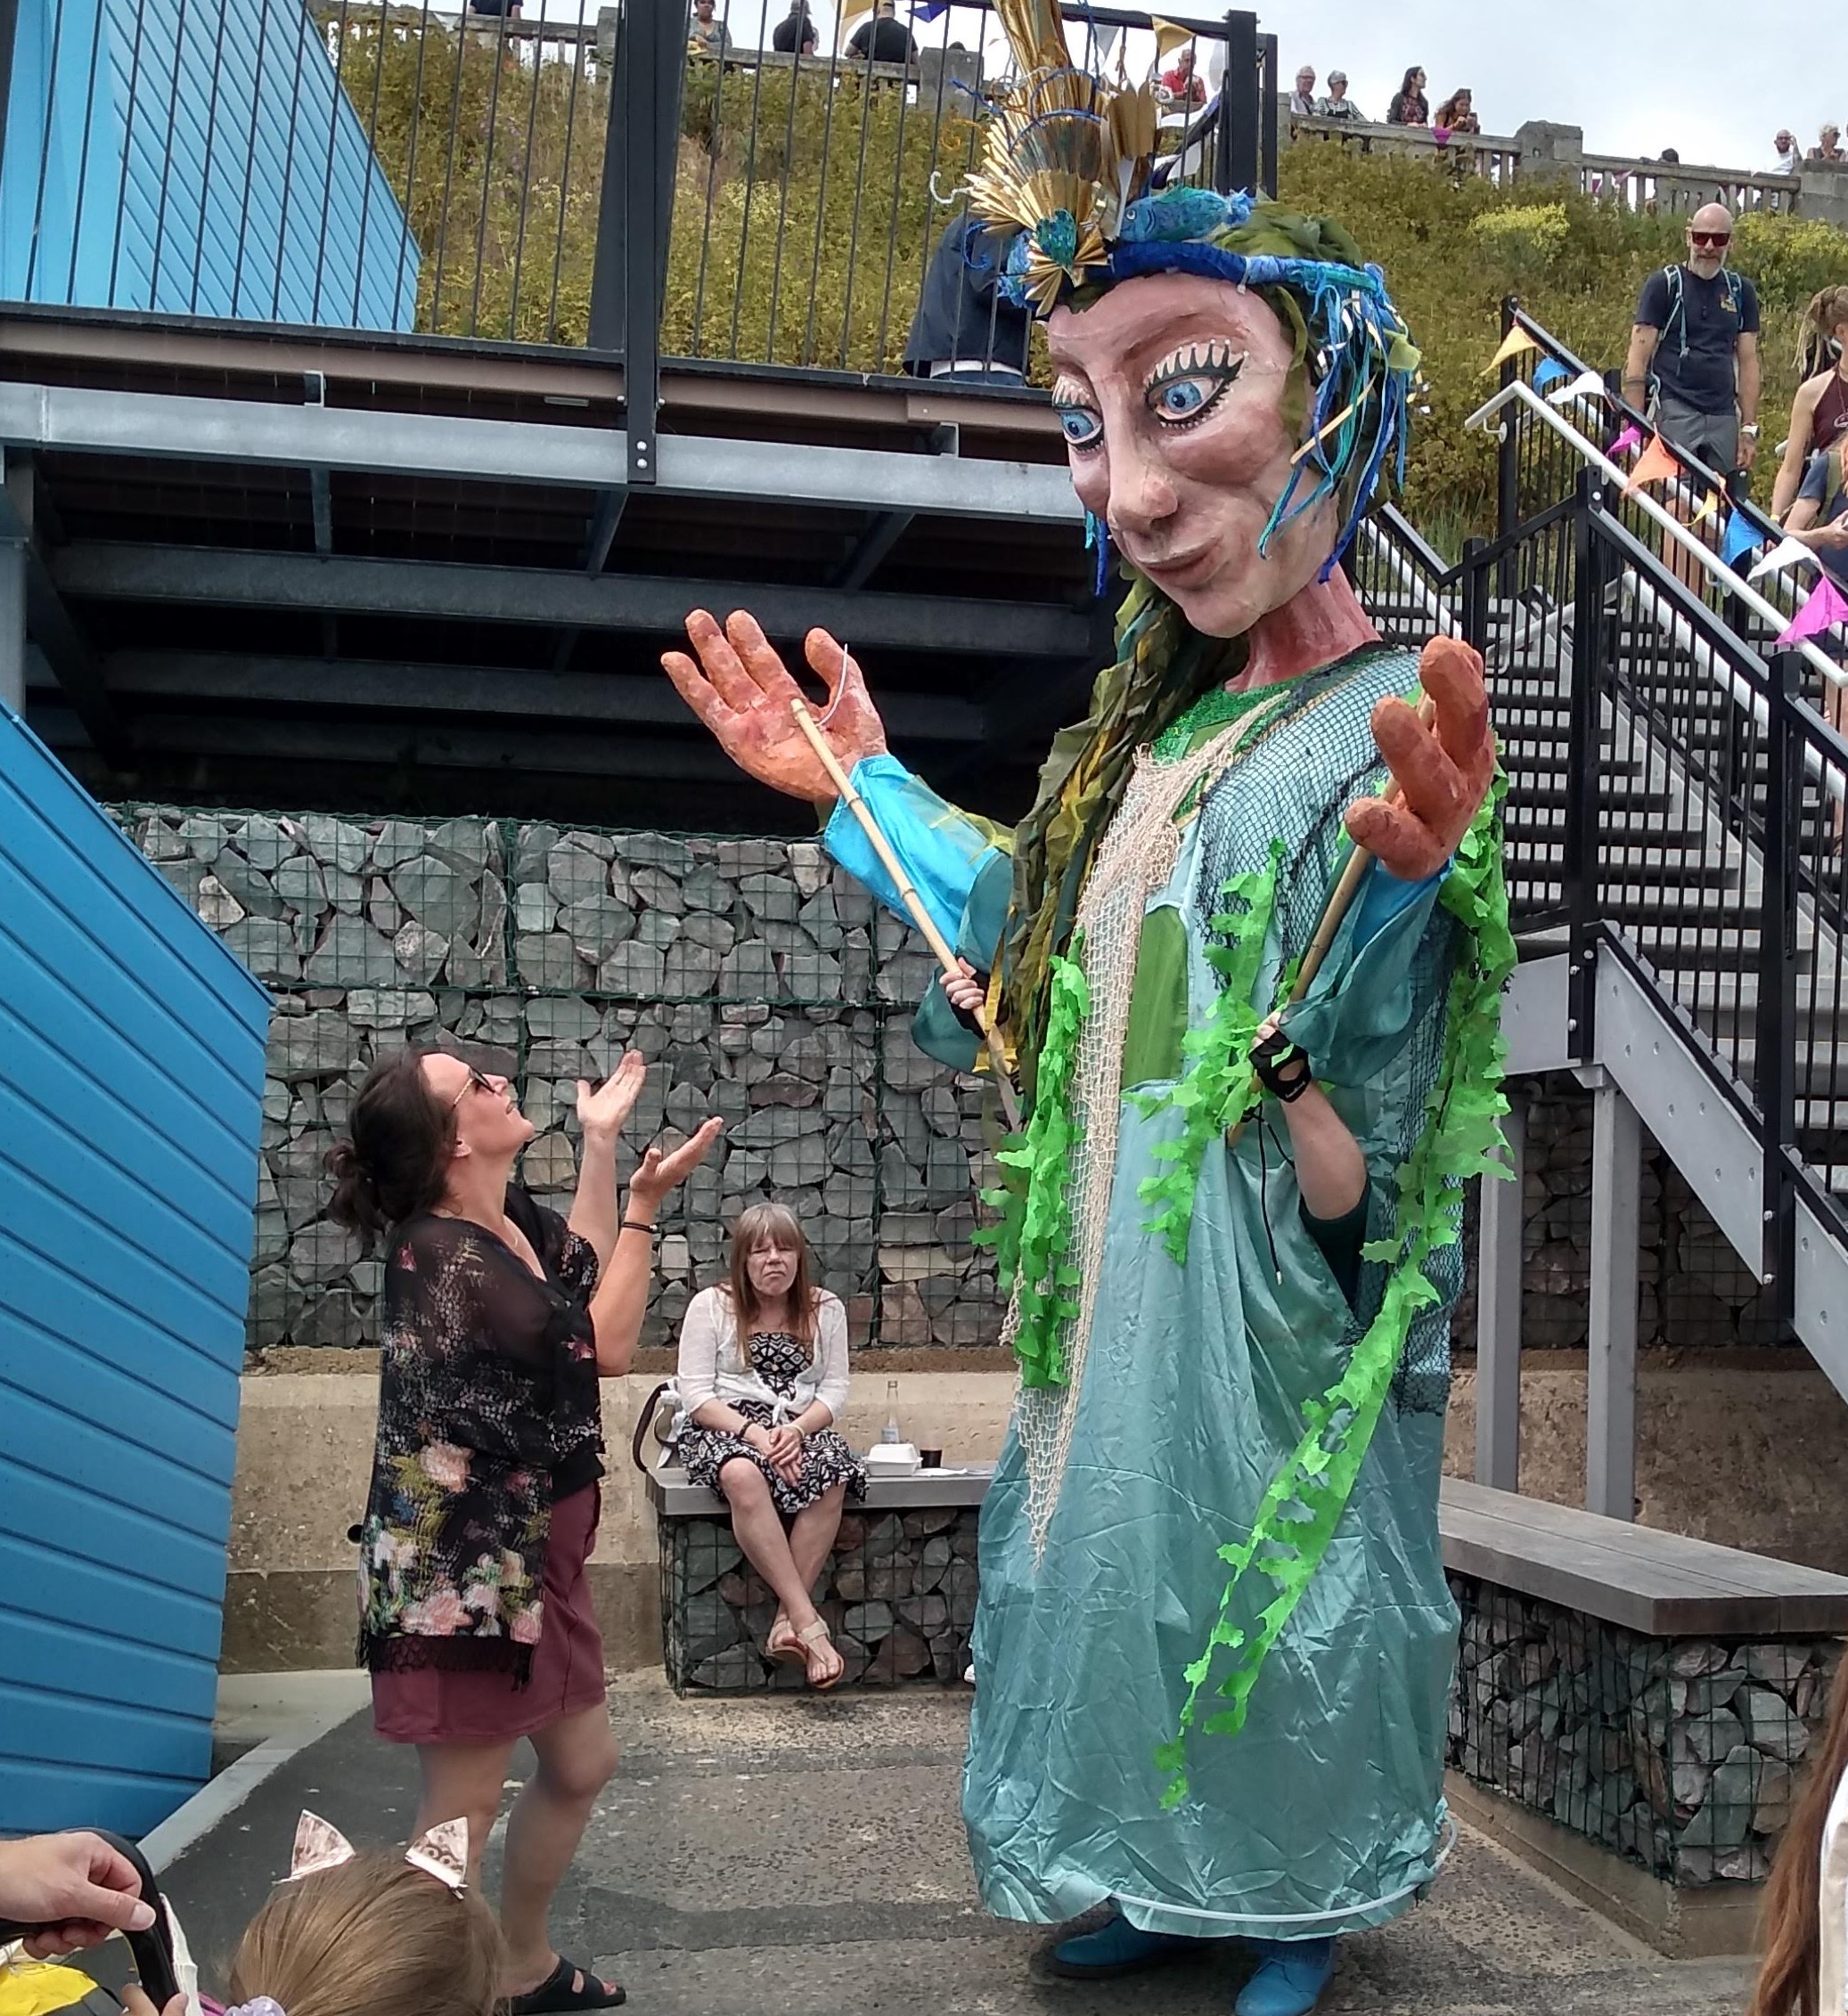 A massive puppet, twice human height, dressed in flowing aquamarine net gown and a rising sun crown holds out its hands, mirroring the actions of a member of the public standing in front of it.